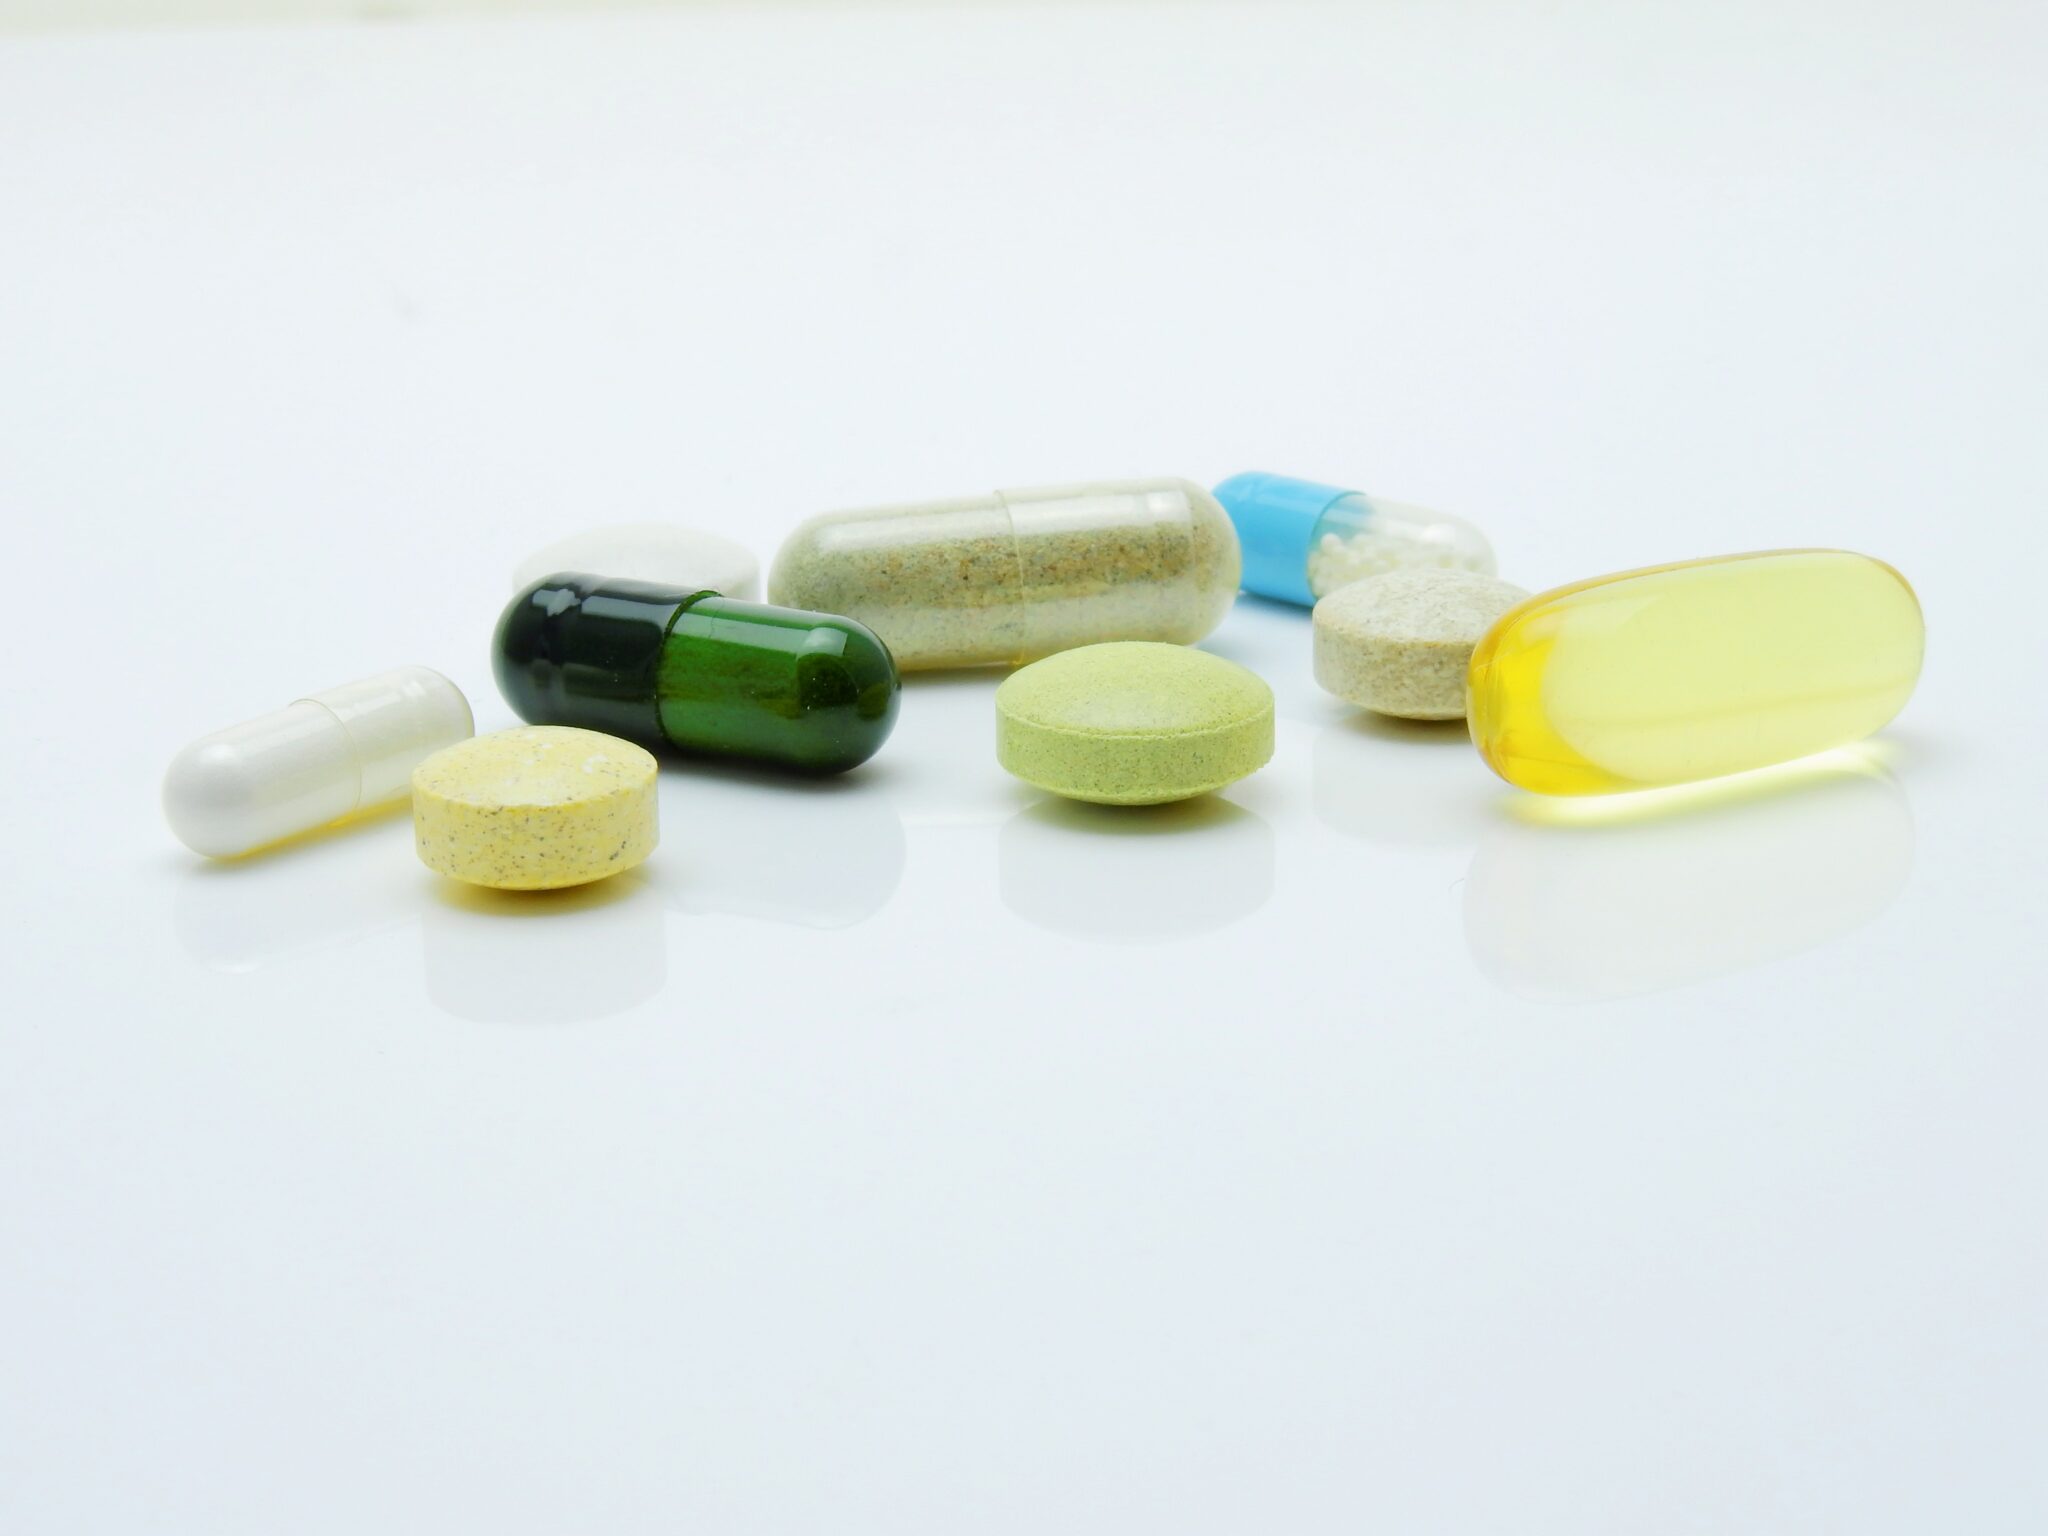 A collection of pills and medications.